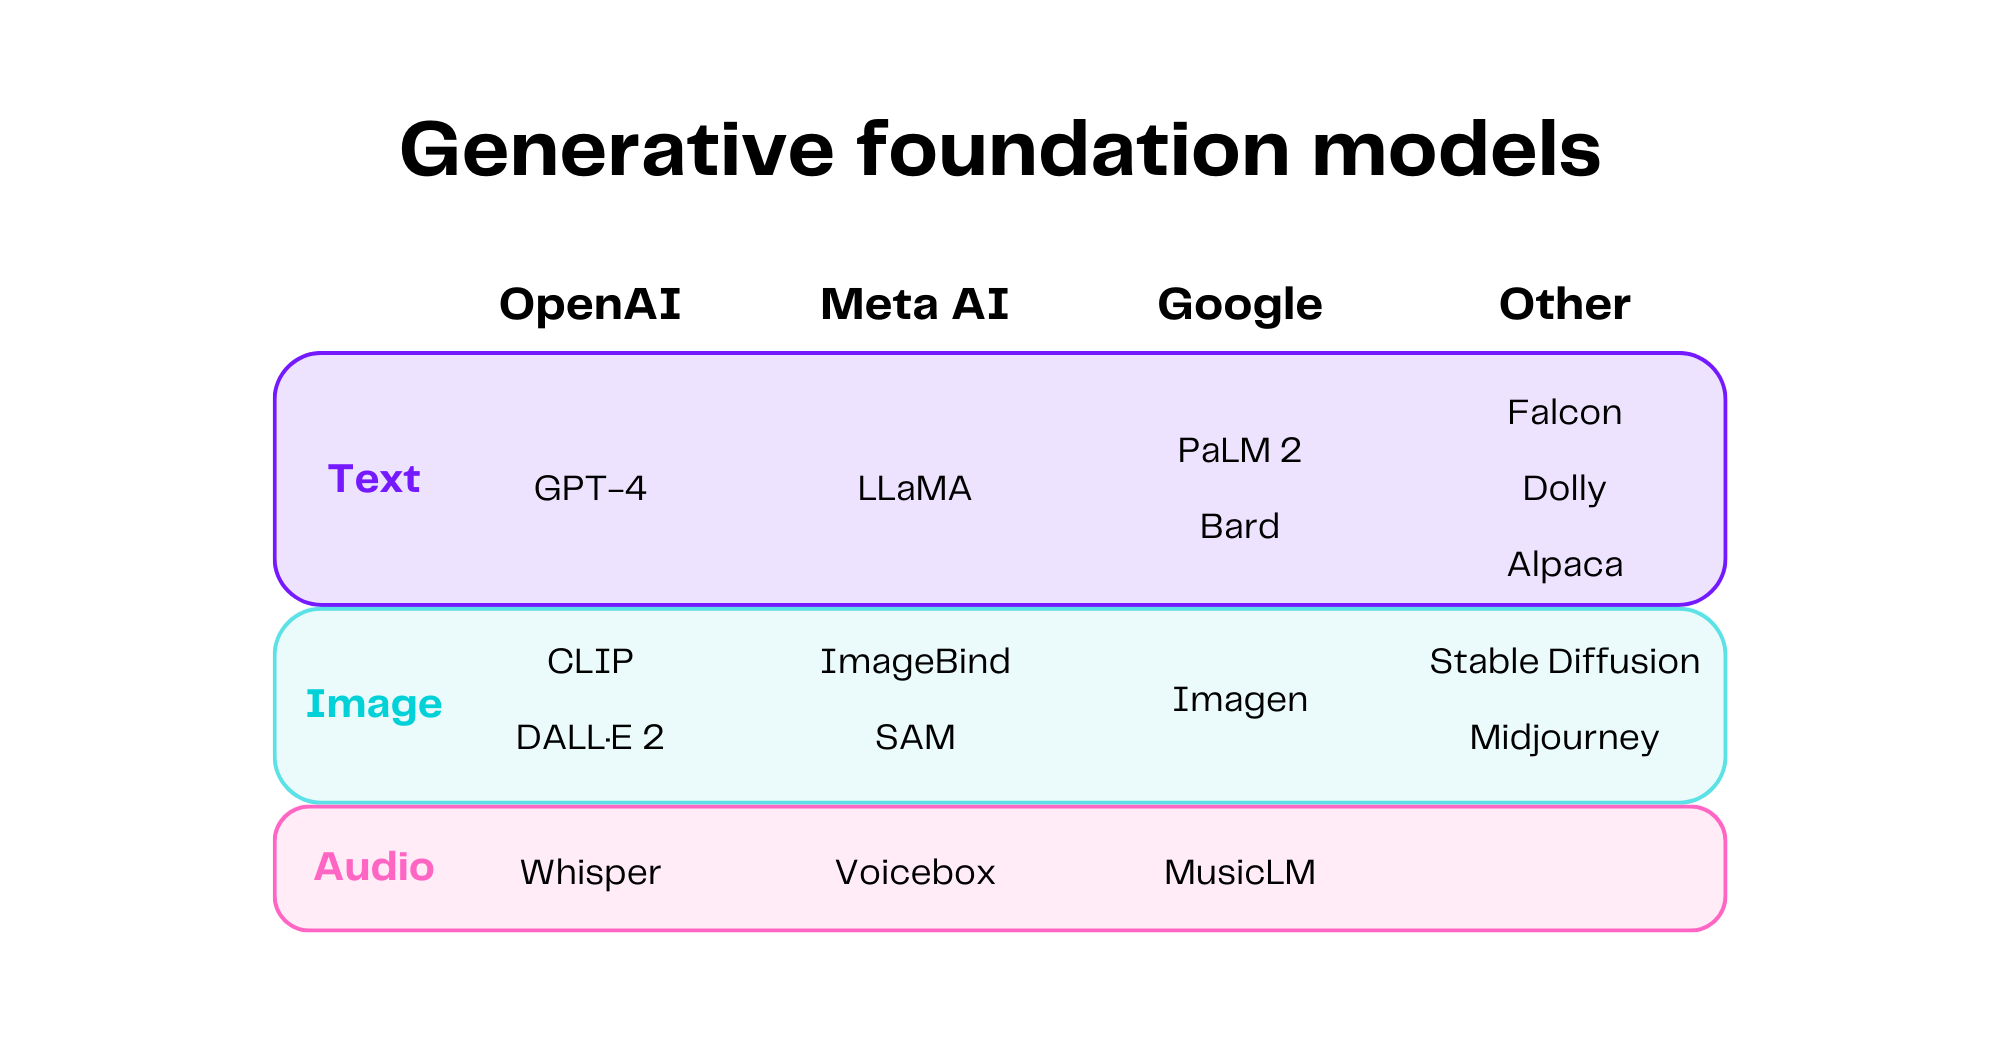 Table showing the most recent generative AI foundation models